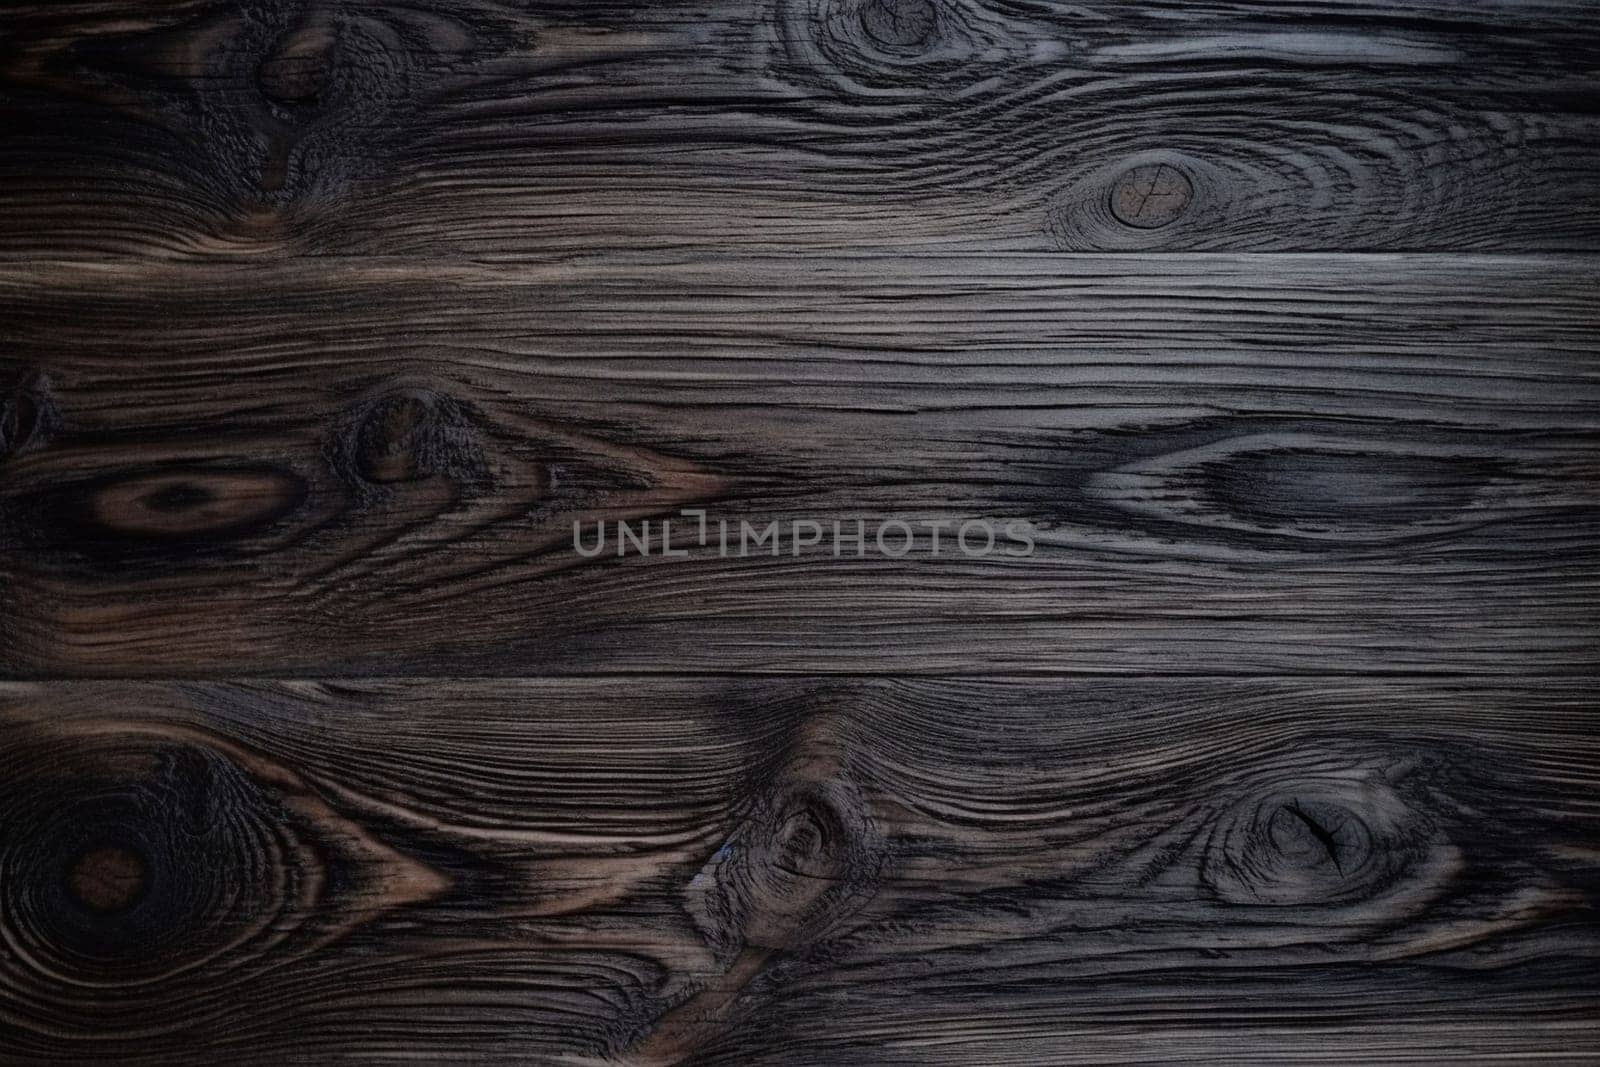 Blue Aqua color. Treated wooden boards - wood decking flooring and wood deck with paneled walls. Textures and patterns of natural wood. Background for interiors. High quality image